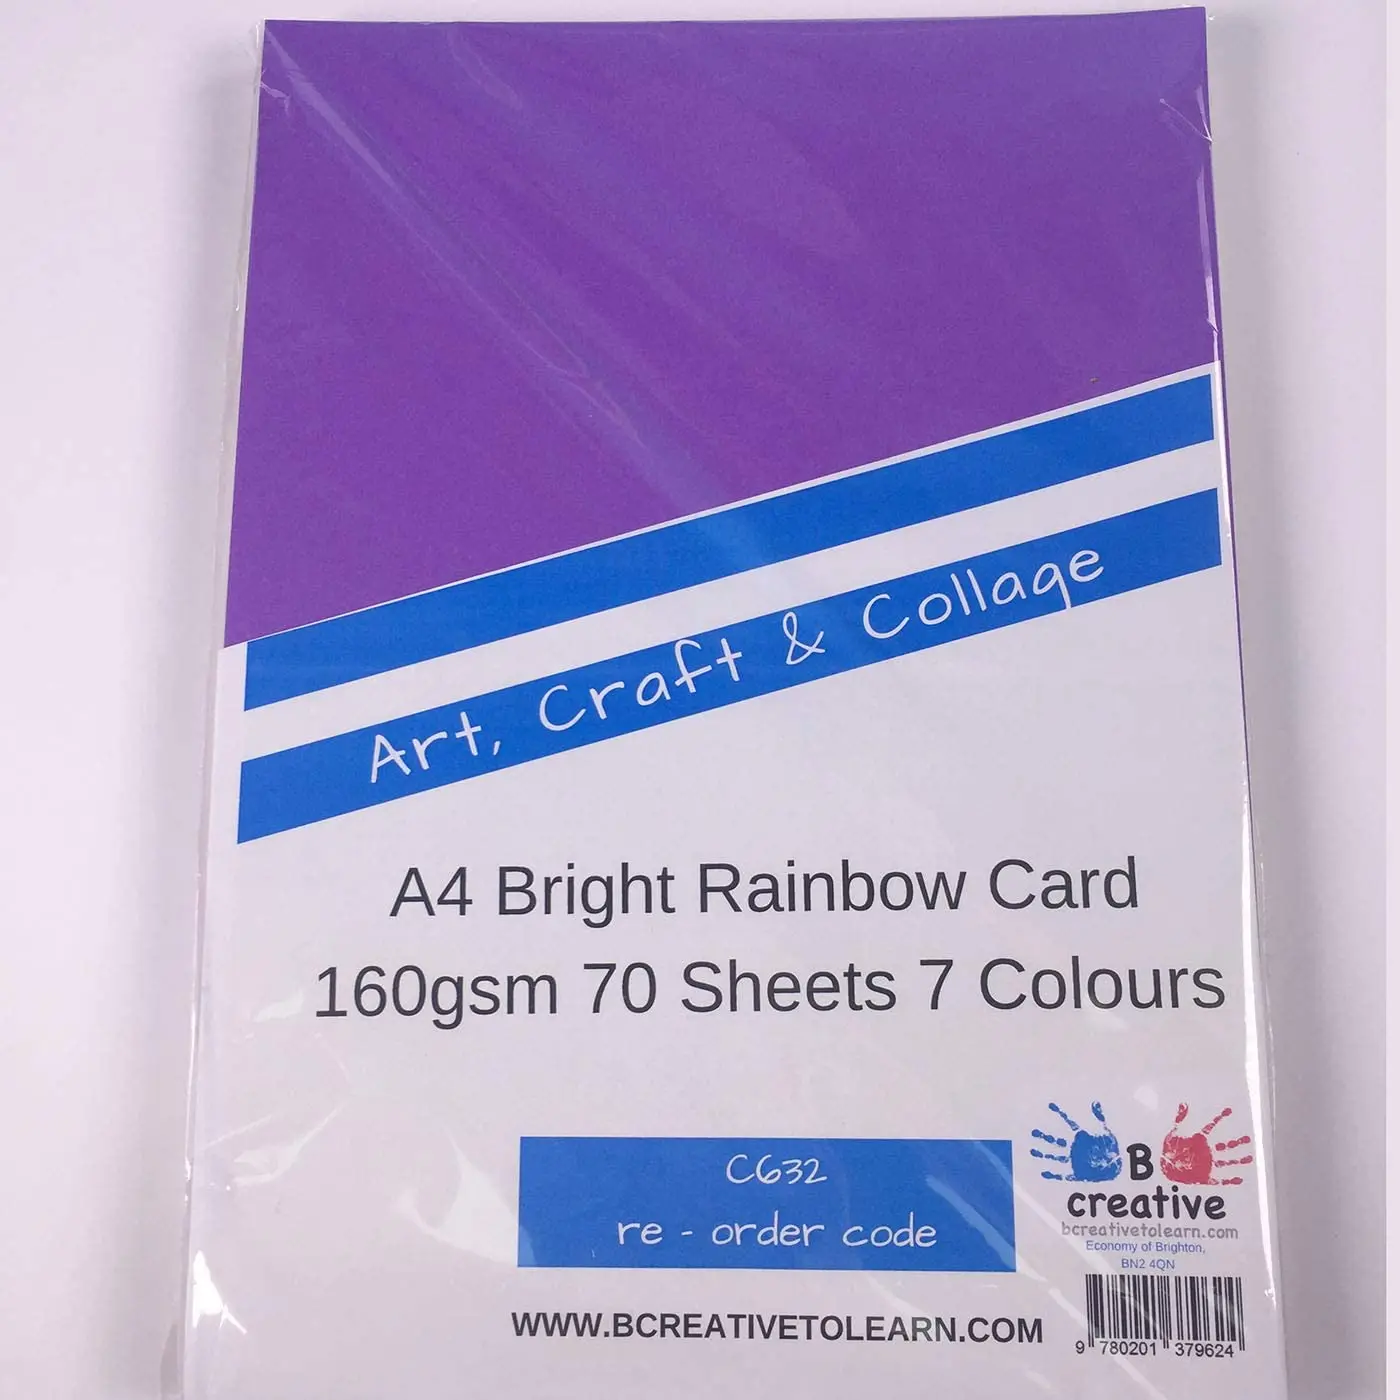 15 Colors 80g A4 Color Paper Manila Paper Fancy Colour Bristol Board Paper  in Sheets for School and Office - China Color Offset Printing Paper,  Notebook Paper